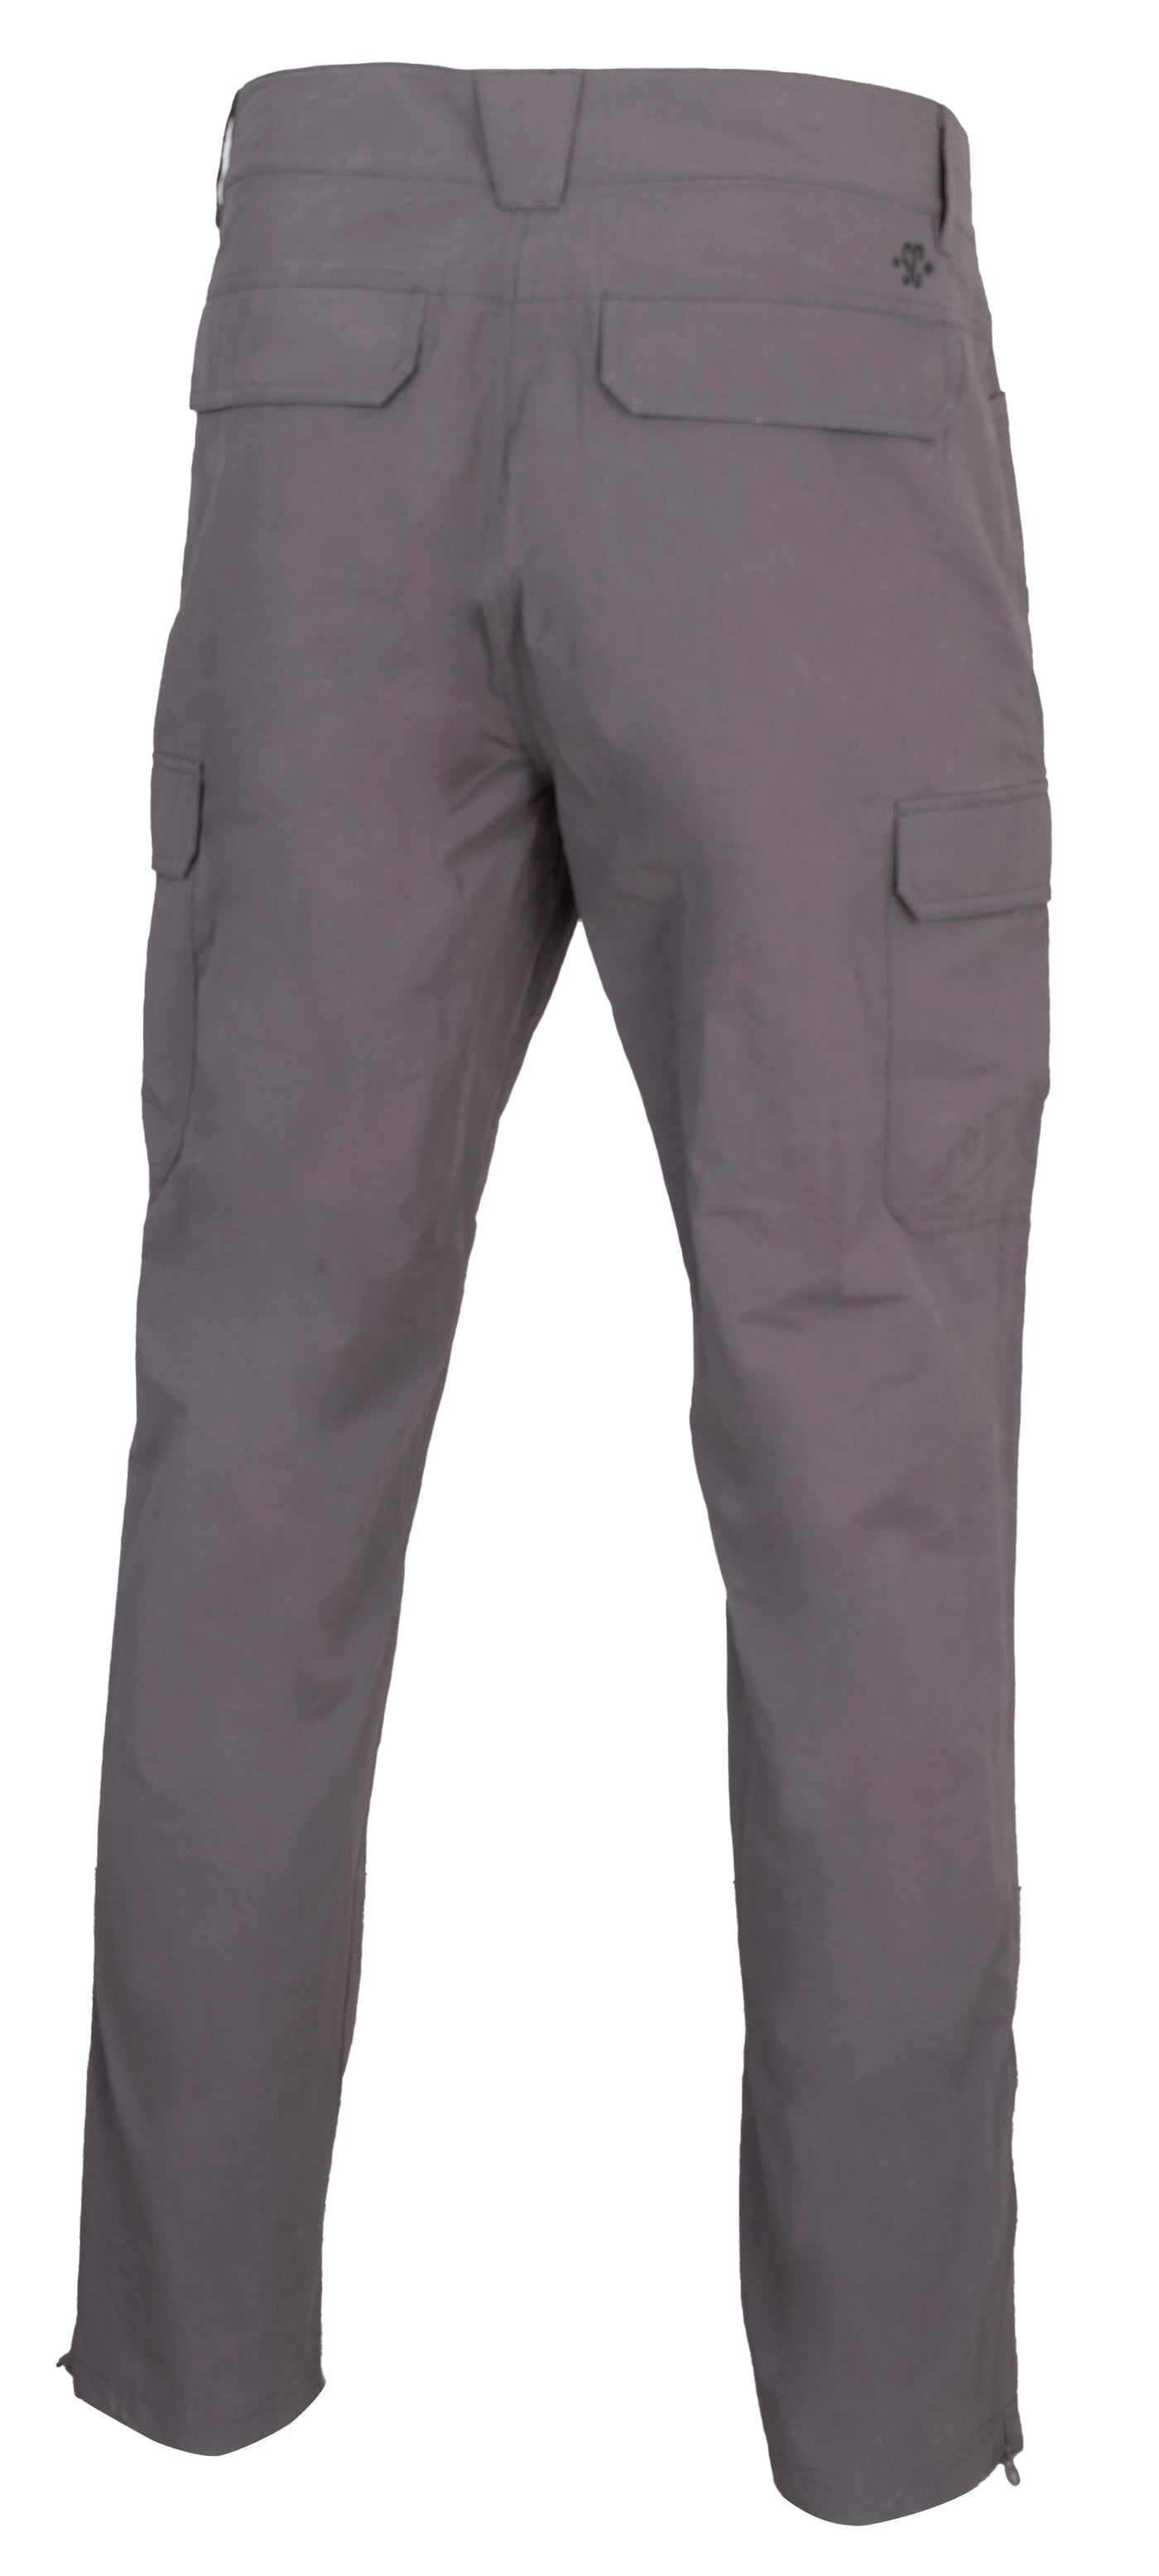 "Crusader" mosquito repellent pants for men - Sportchief